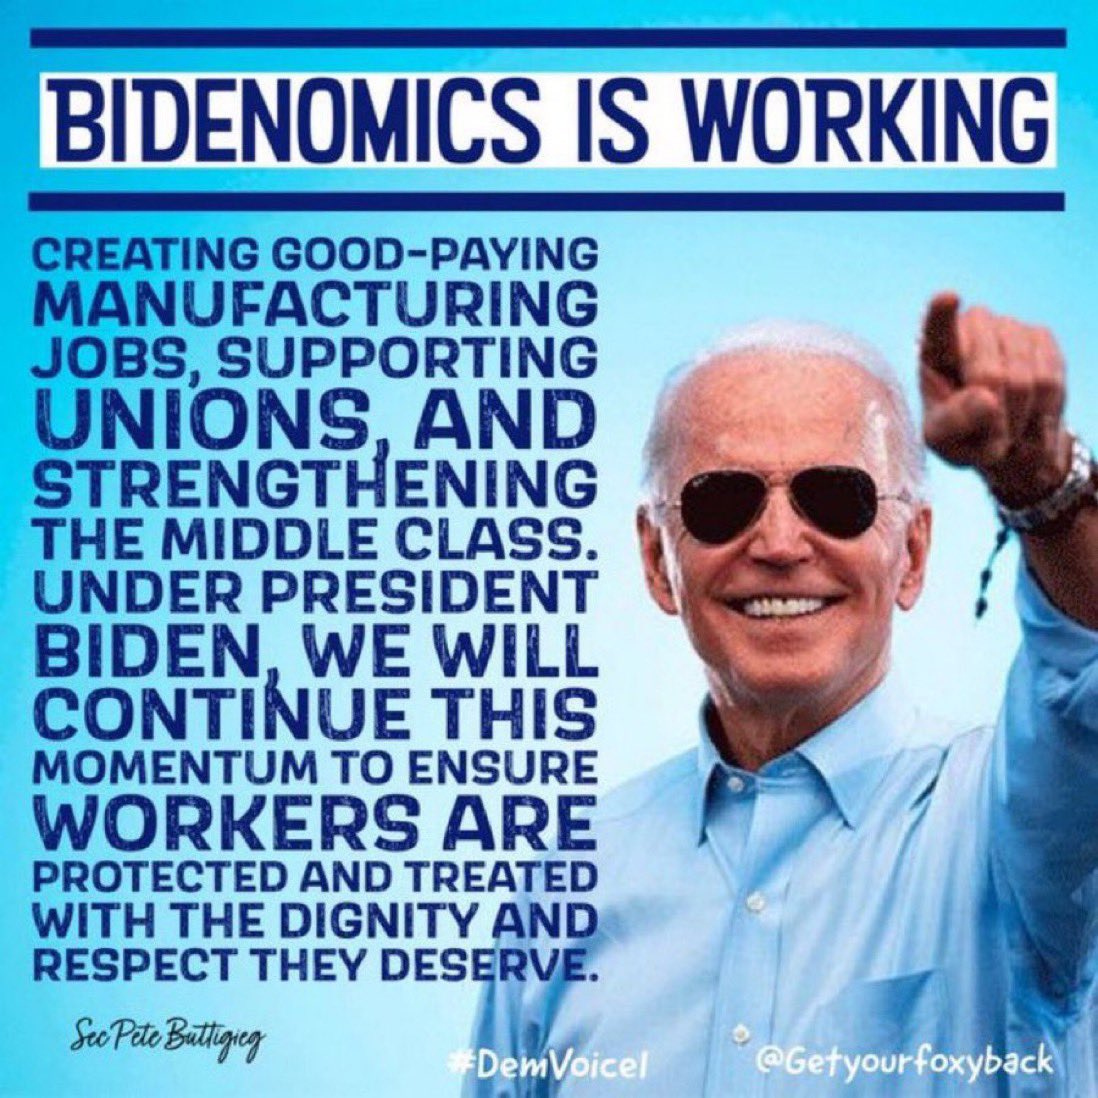 Thanks to Bidenomics, unemployment has been under 4% for longer than anytime since the 1960s. In the last 3 years Americans have set records in small business startups and investments in new manufacturing. Thats building from the bottom up & middle out! #DemVoice1